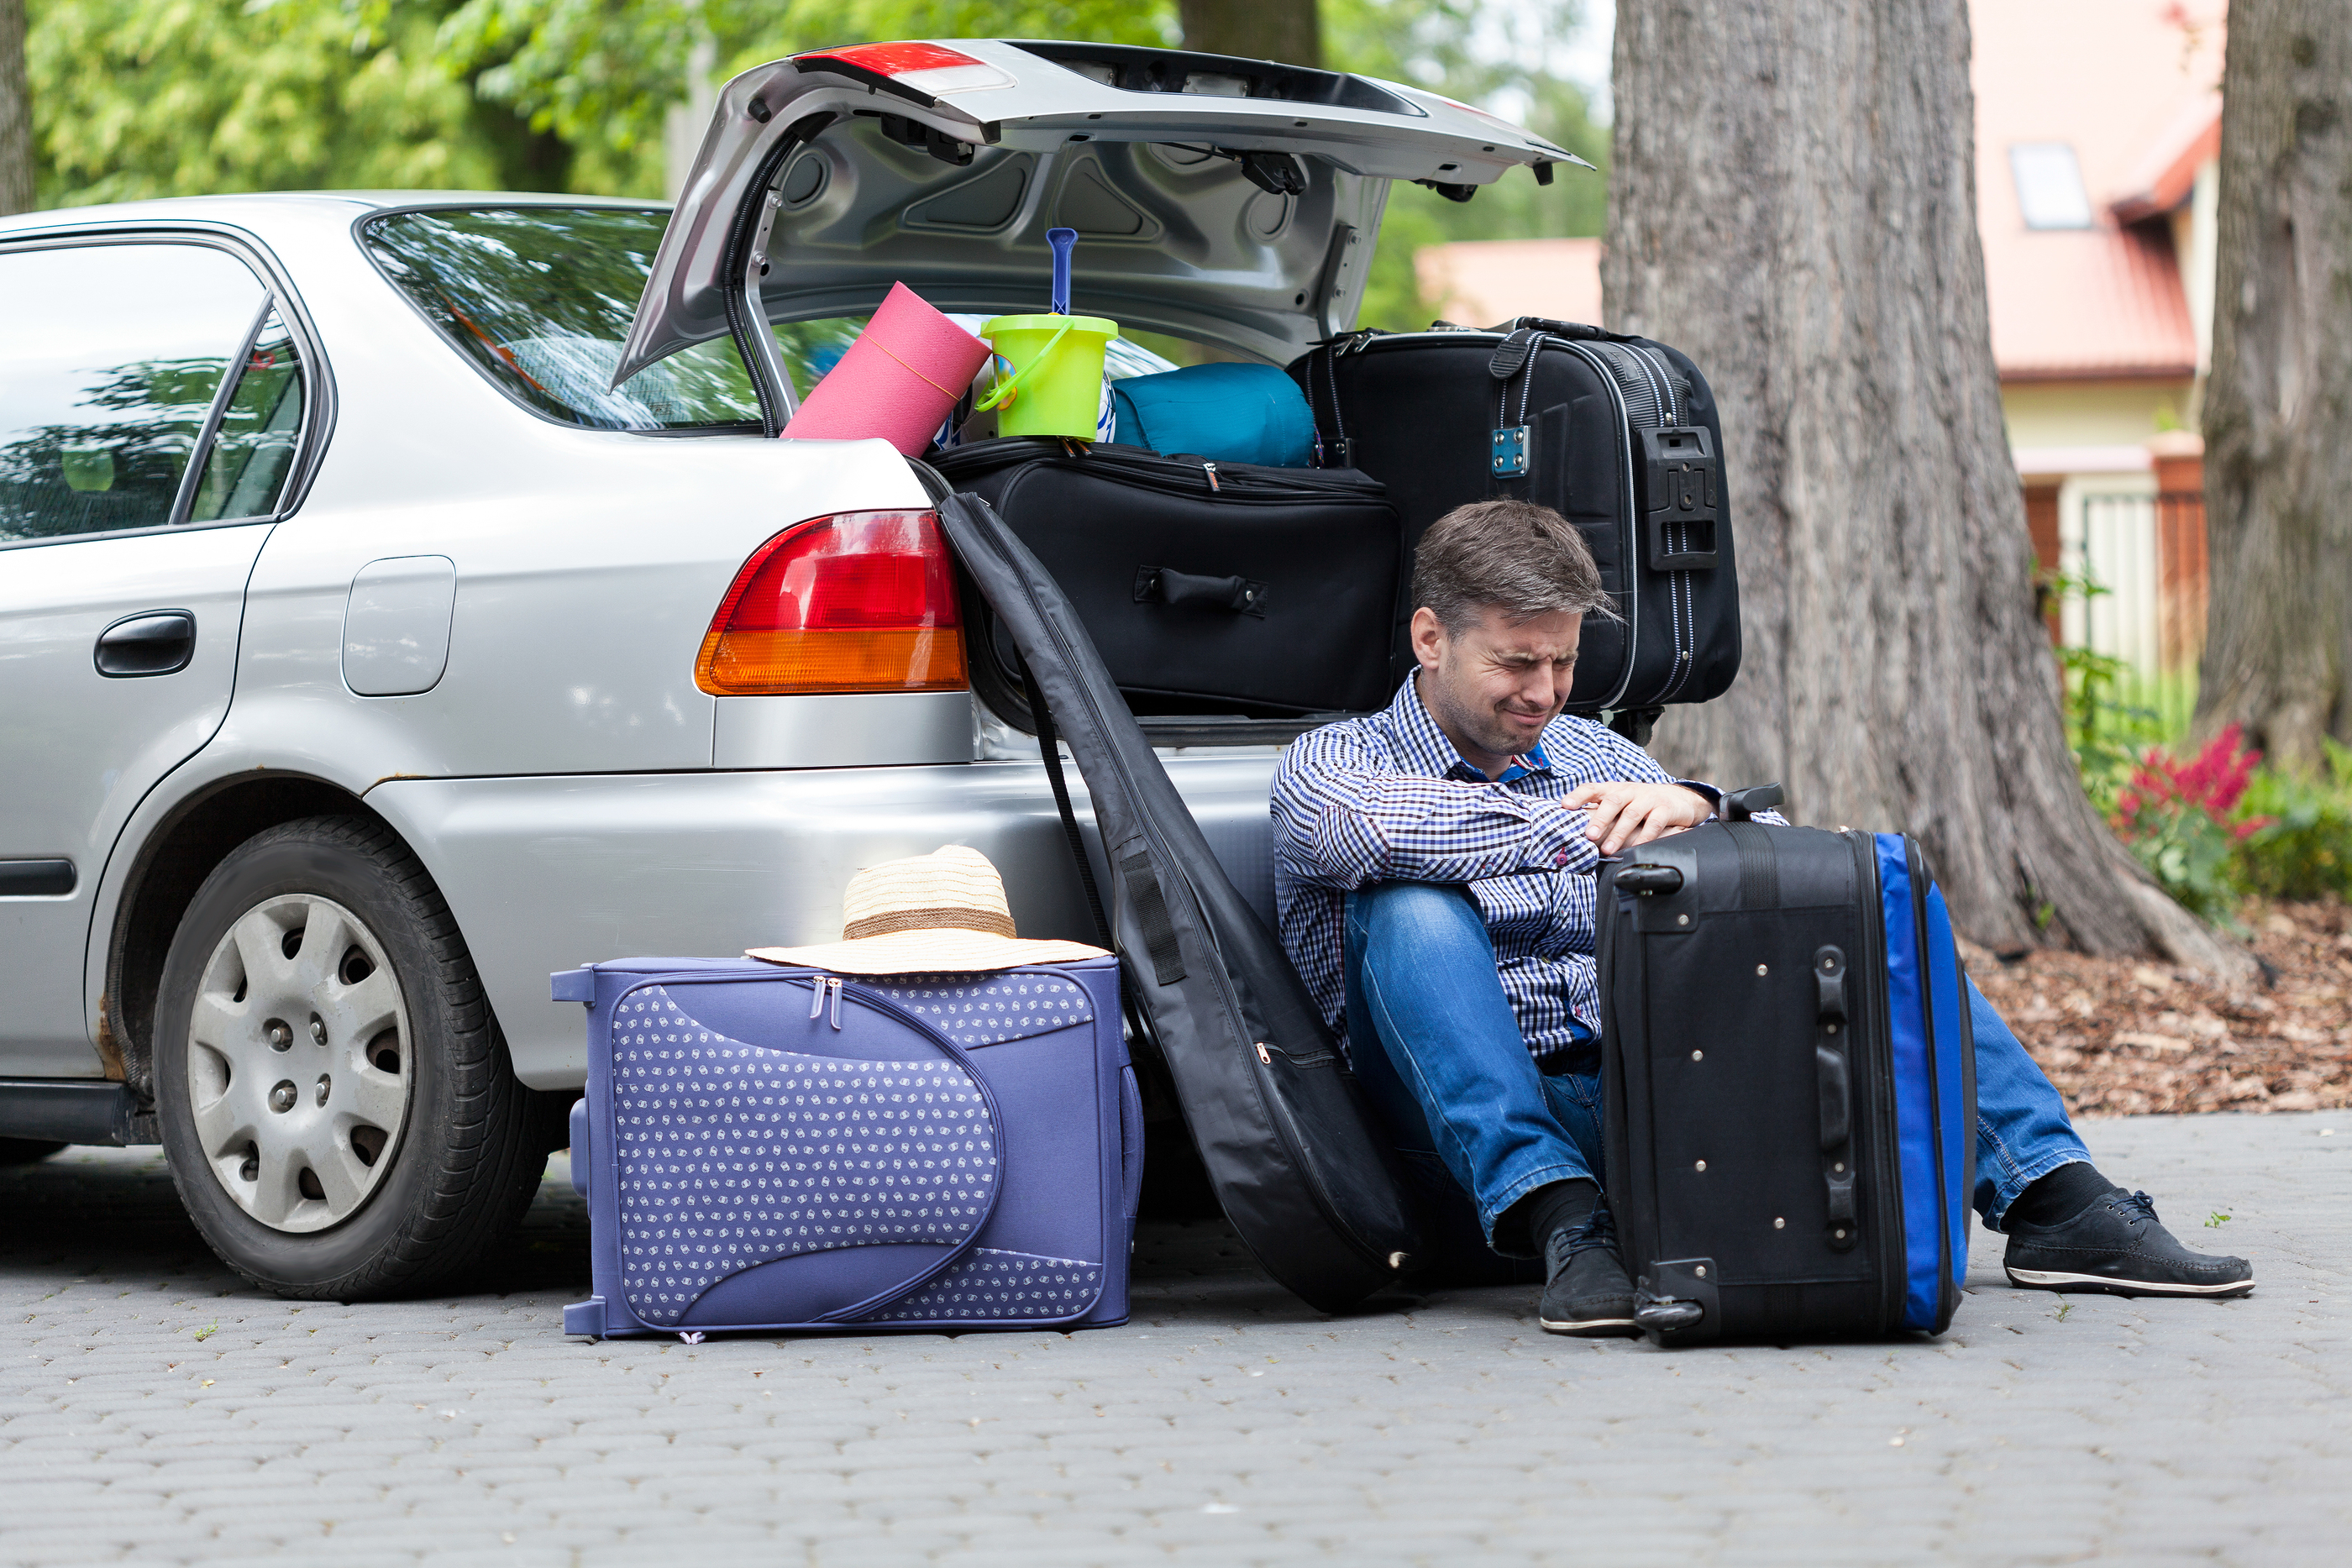 a man sitting in the trunk of a car with luggage